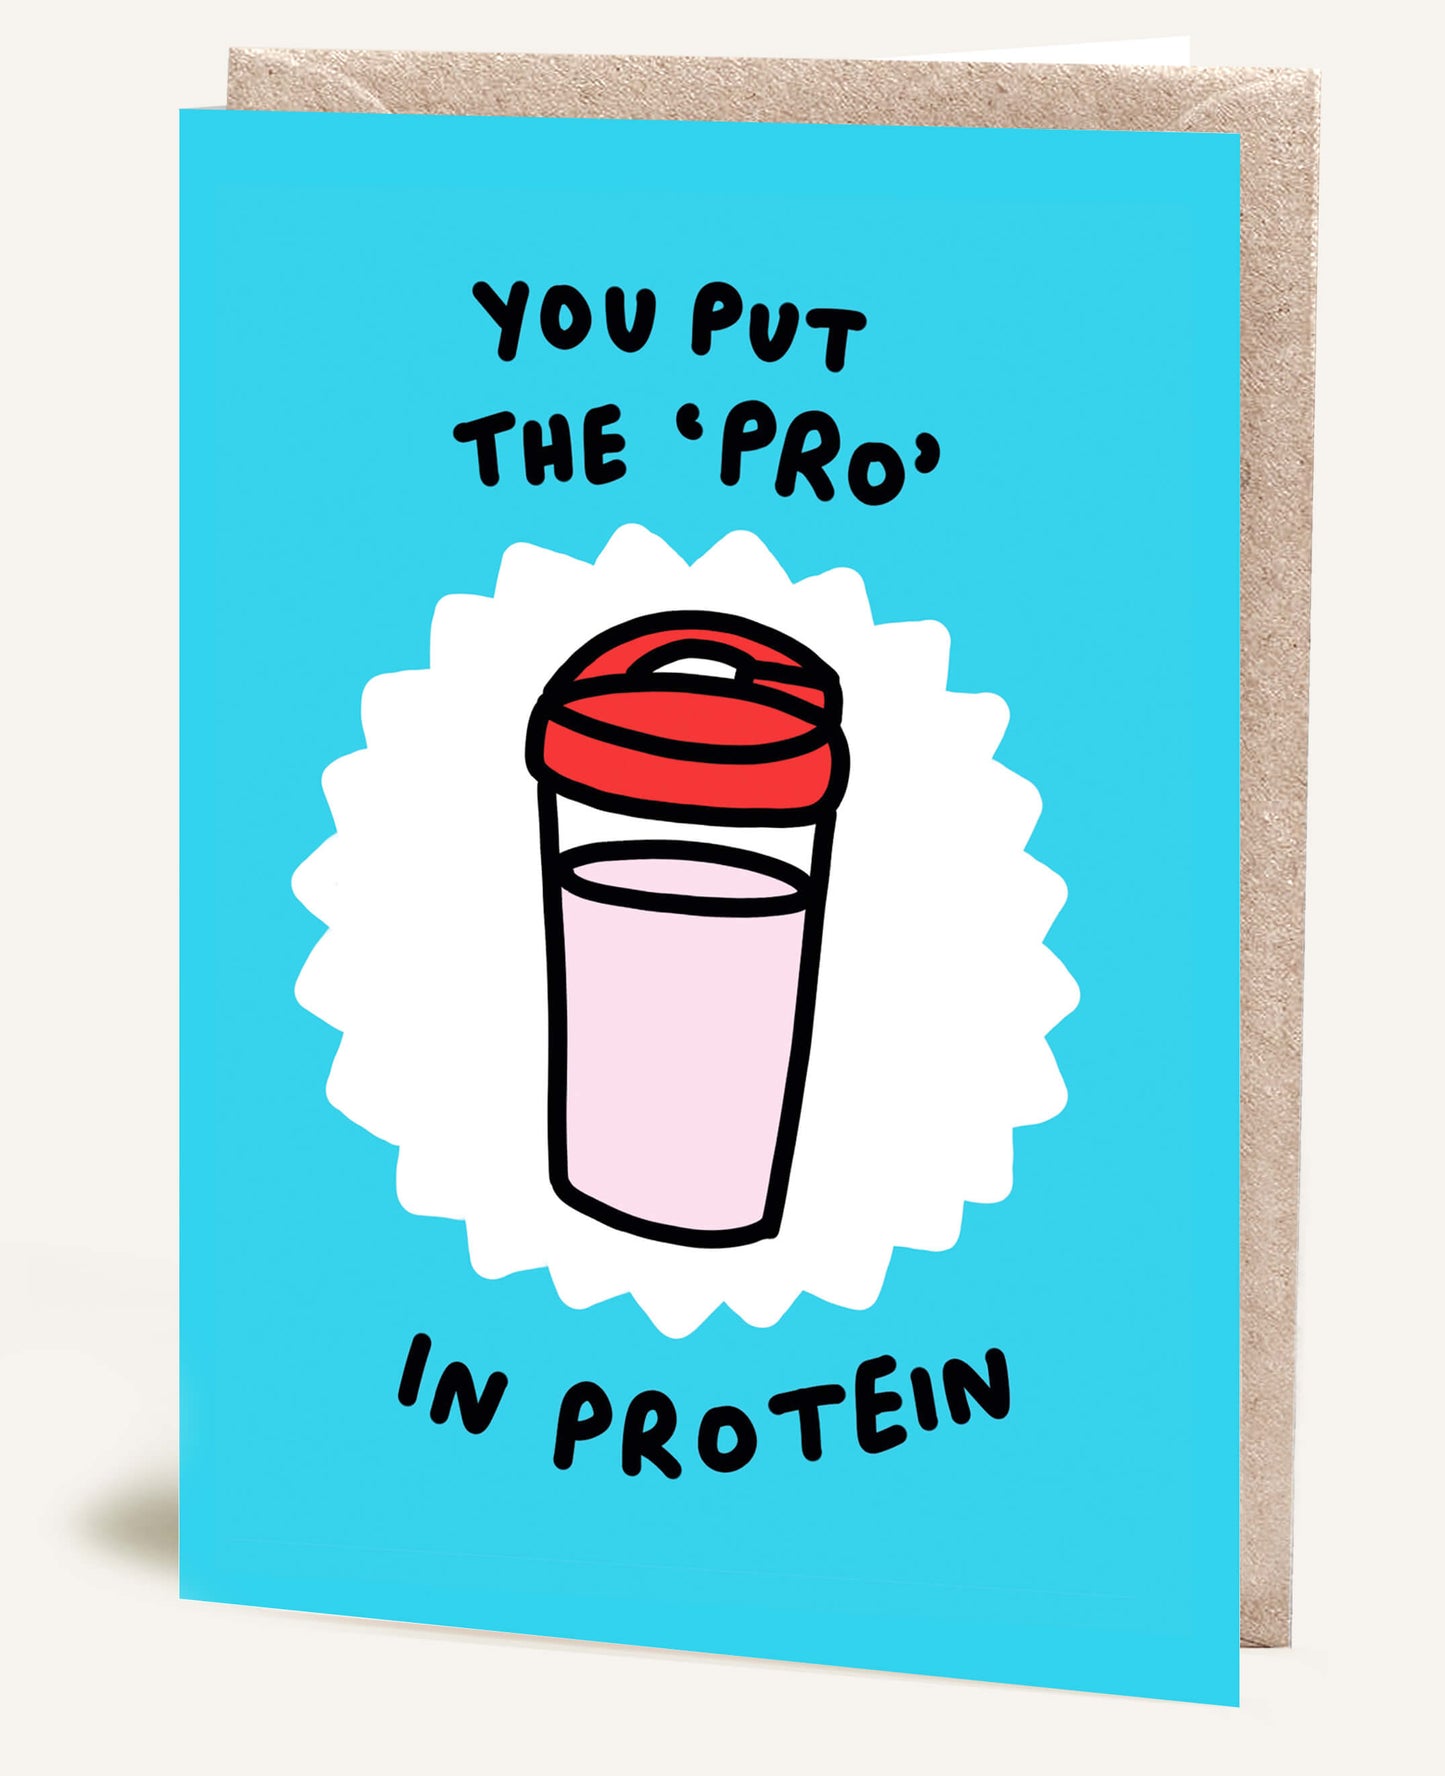 PRO IN PROTEIN